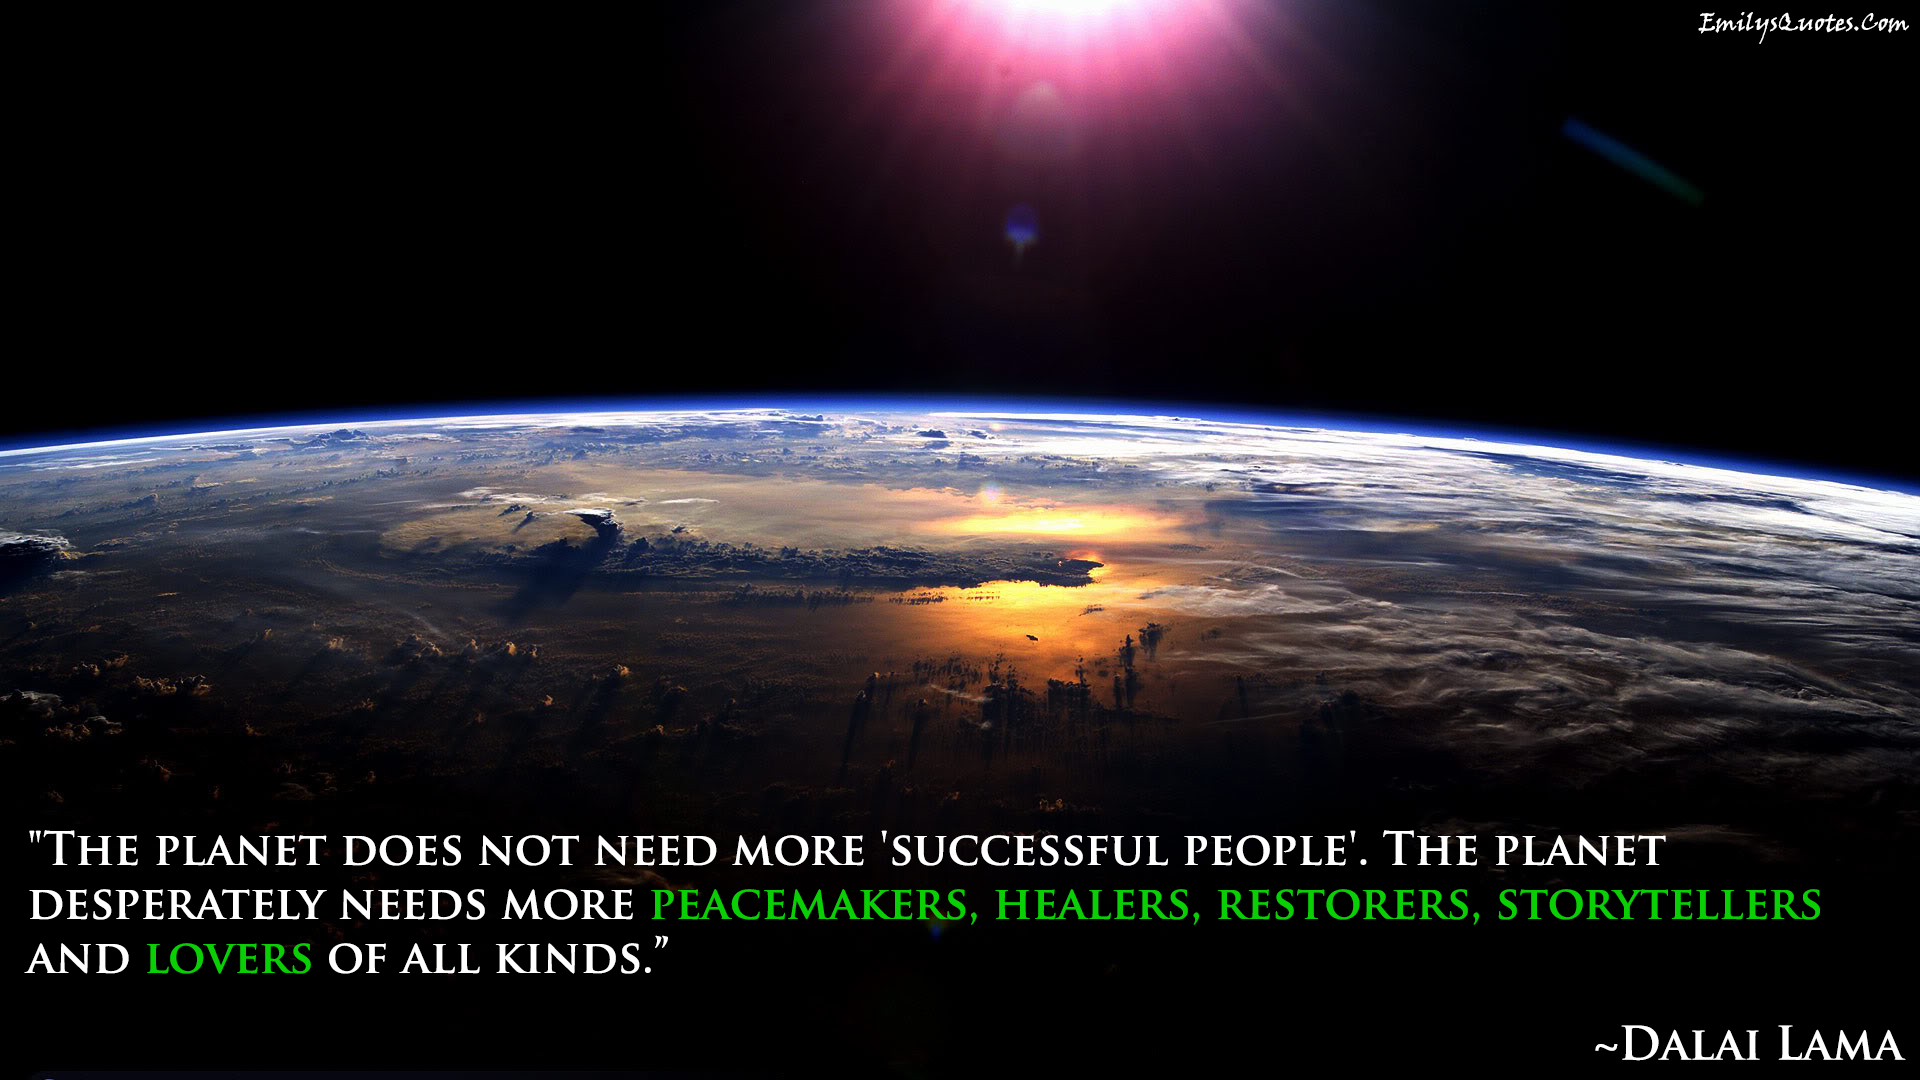 The planet does not need more ‘successful people’. The planet desperately